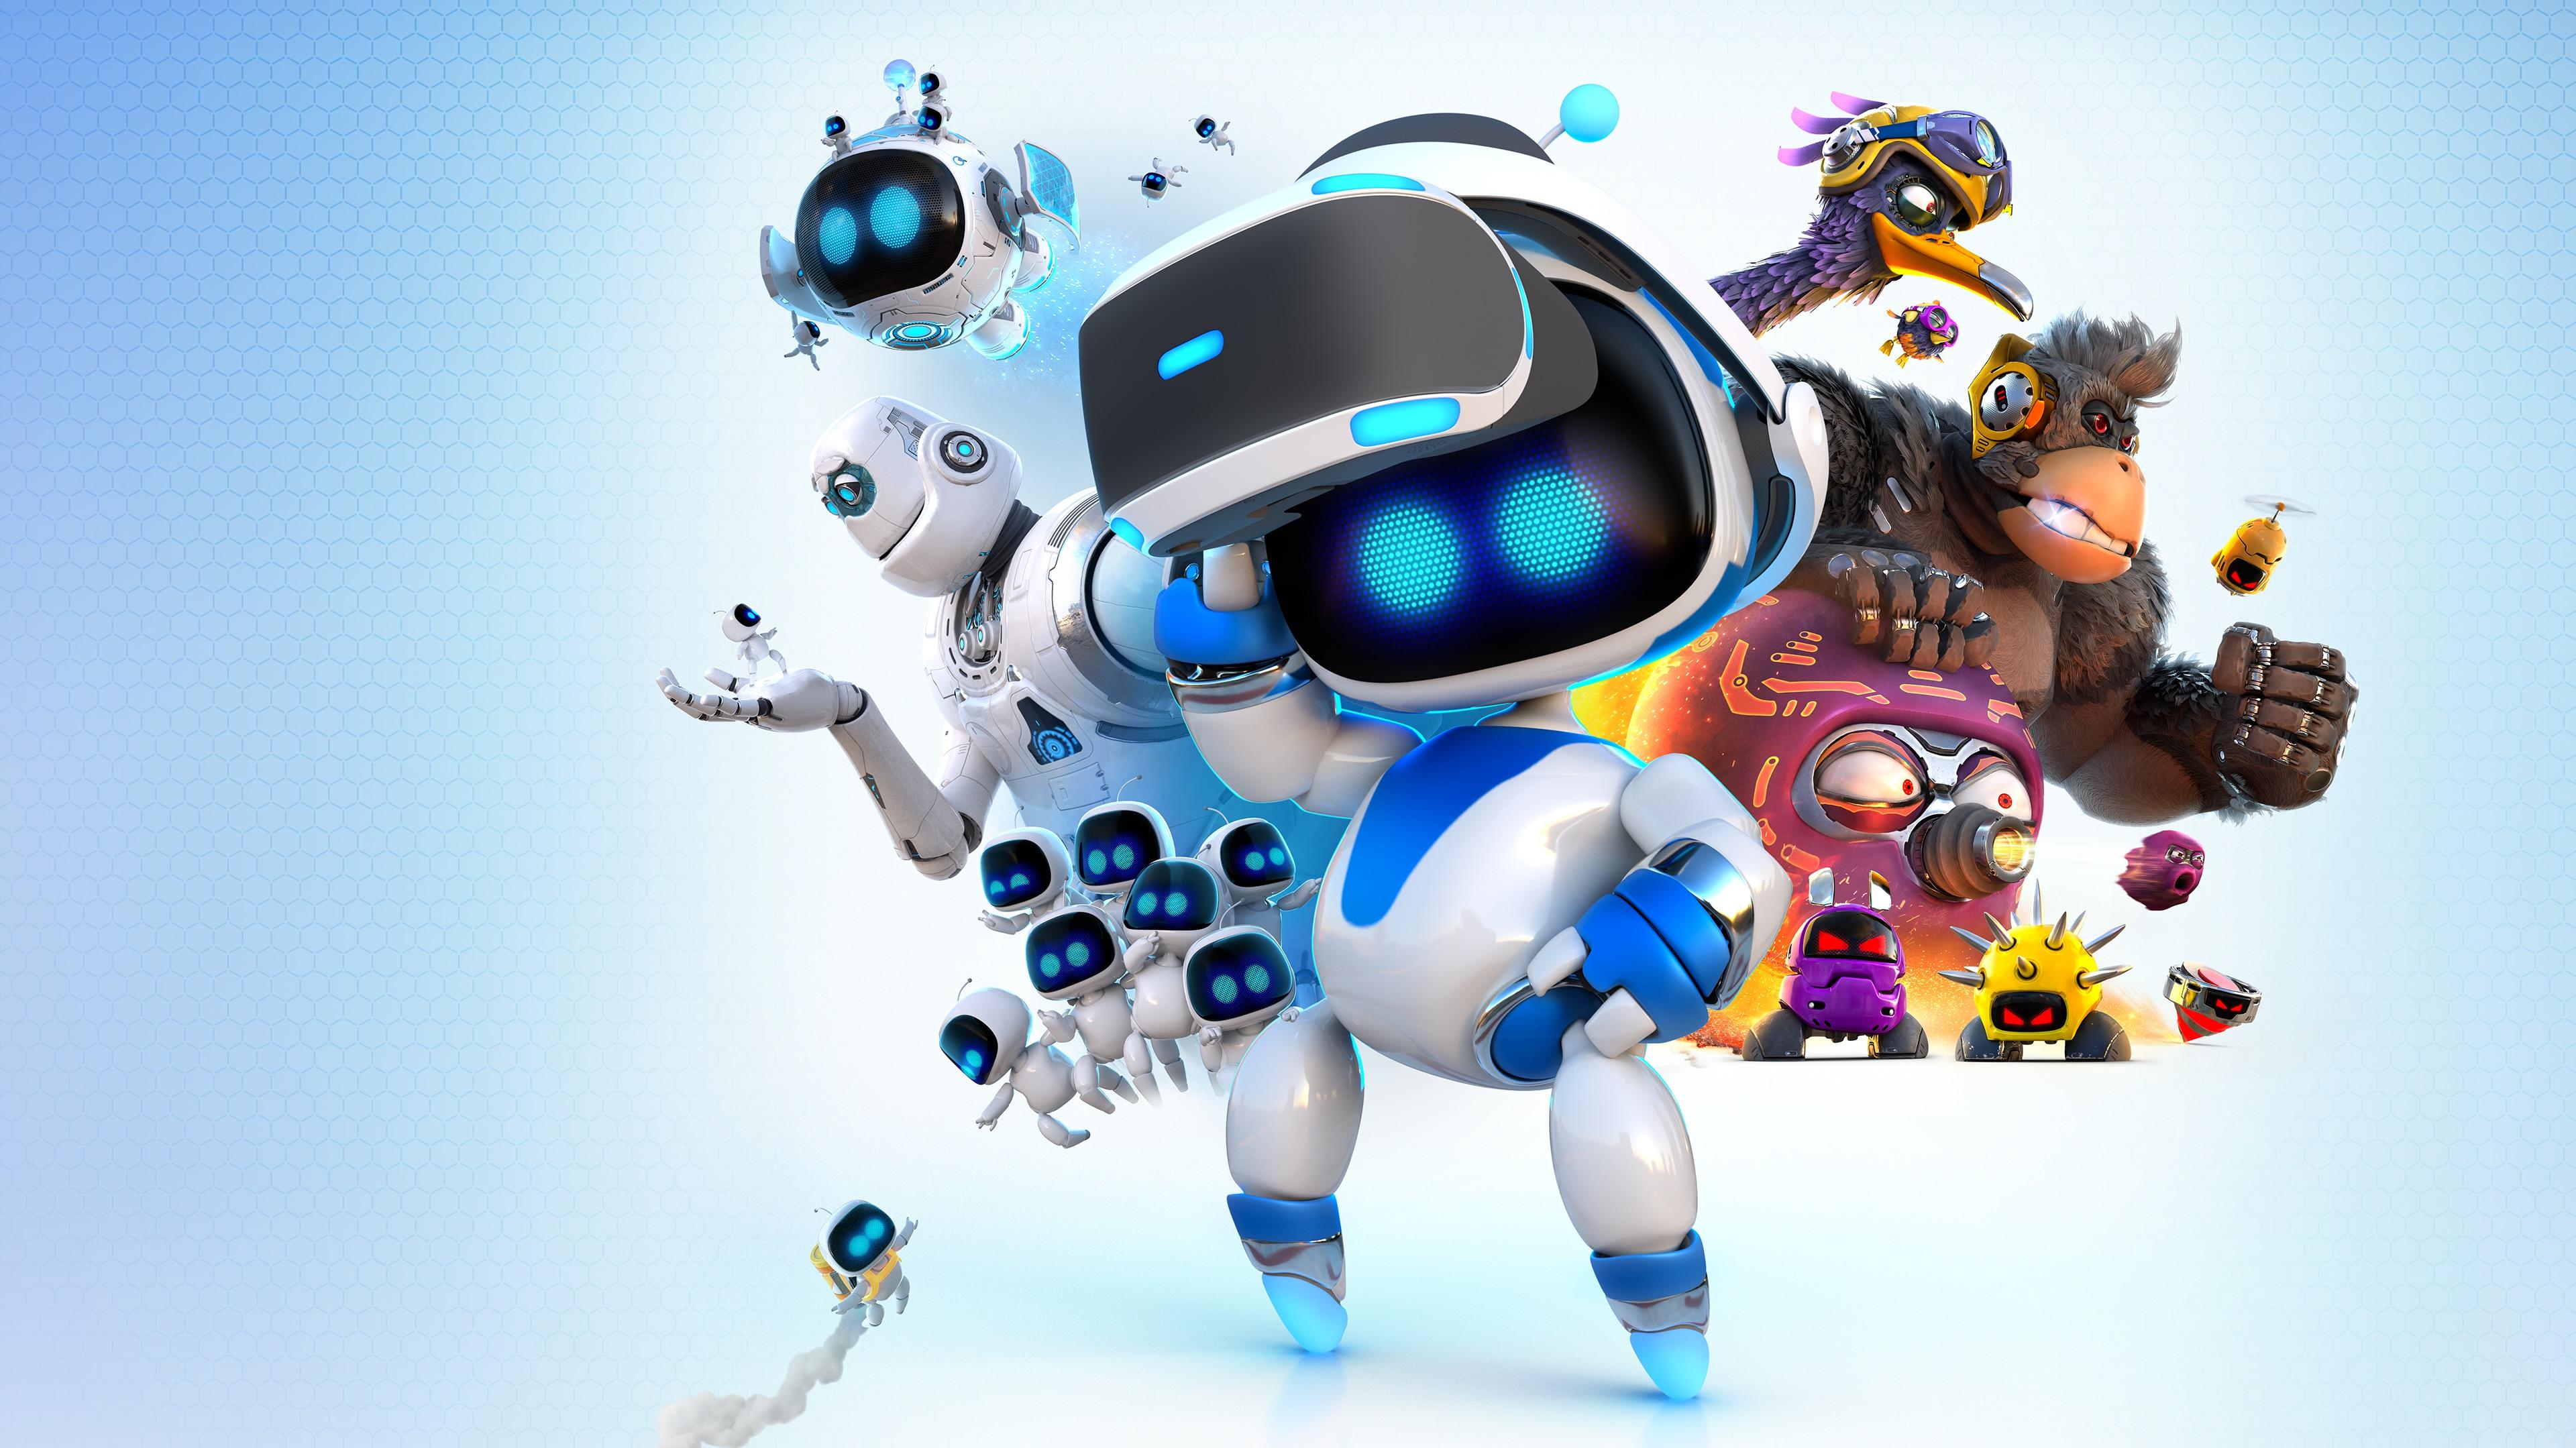 Video Game Astro Bot Rescue Mission 4k Ultra HD Wallpaper